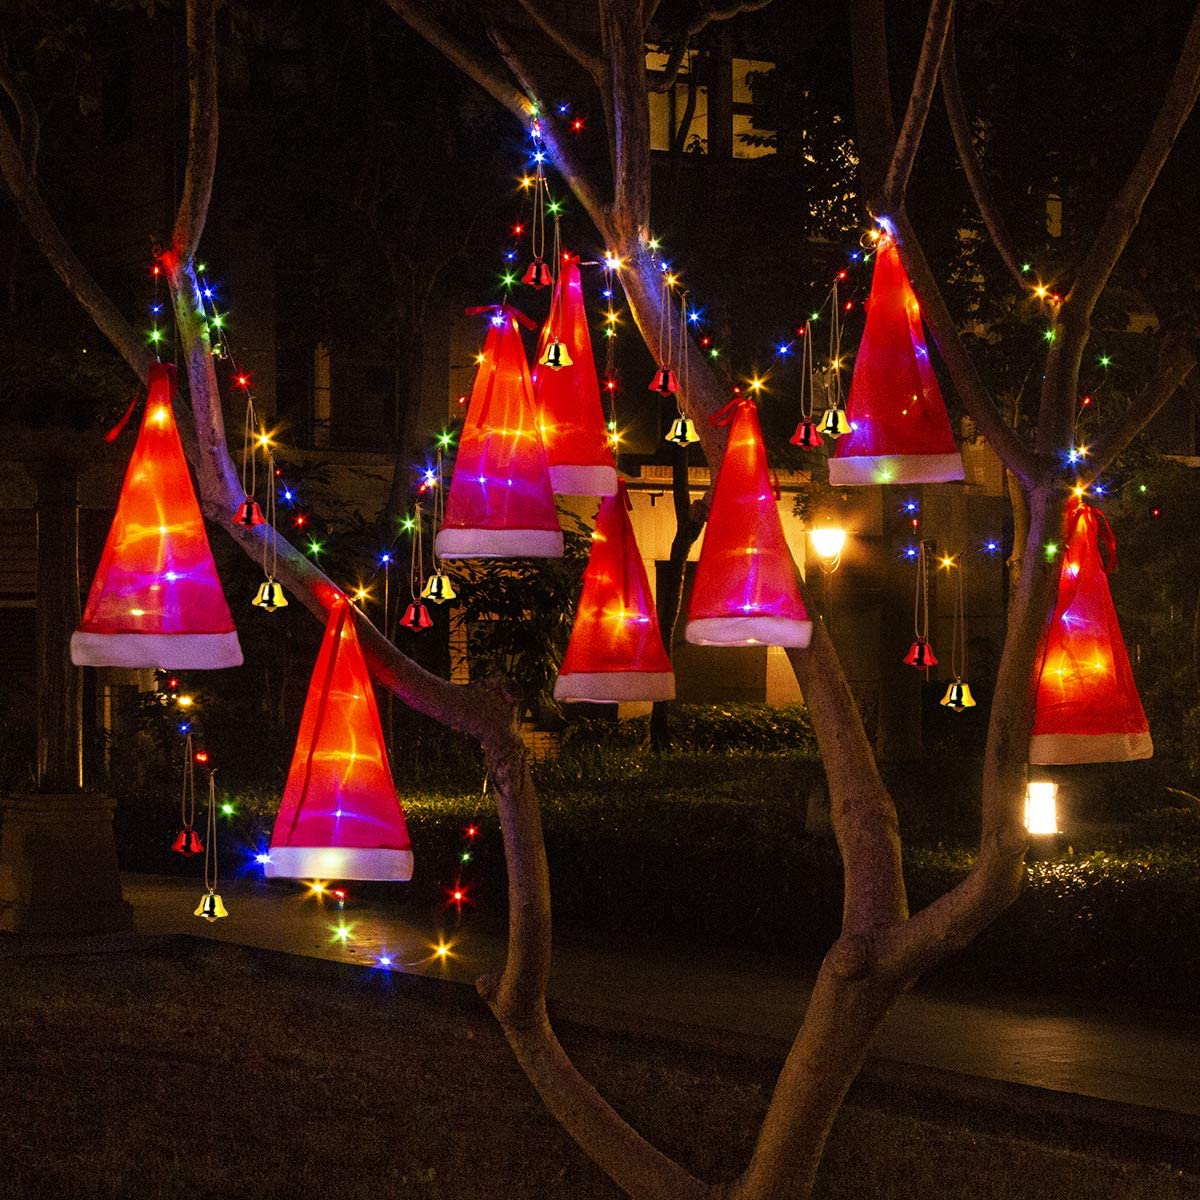 Christmas Ornaments,Decorations Outdoor 8Pcs Hanging Lighted Glowing Santa Hats with 14Pcs Small Decor Bells 33ft Christmas Lights String with 8 Lighting Modes for Outdoor, Indoor, Yard, Tree - image 2 of 6